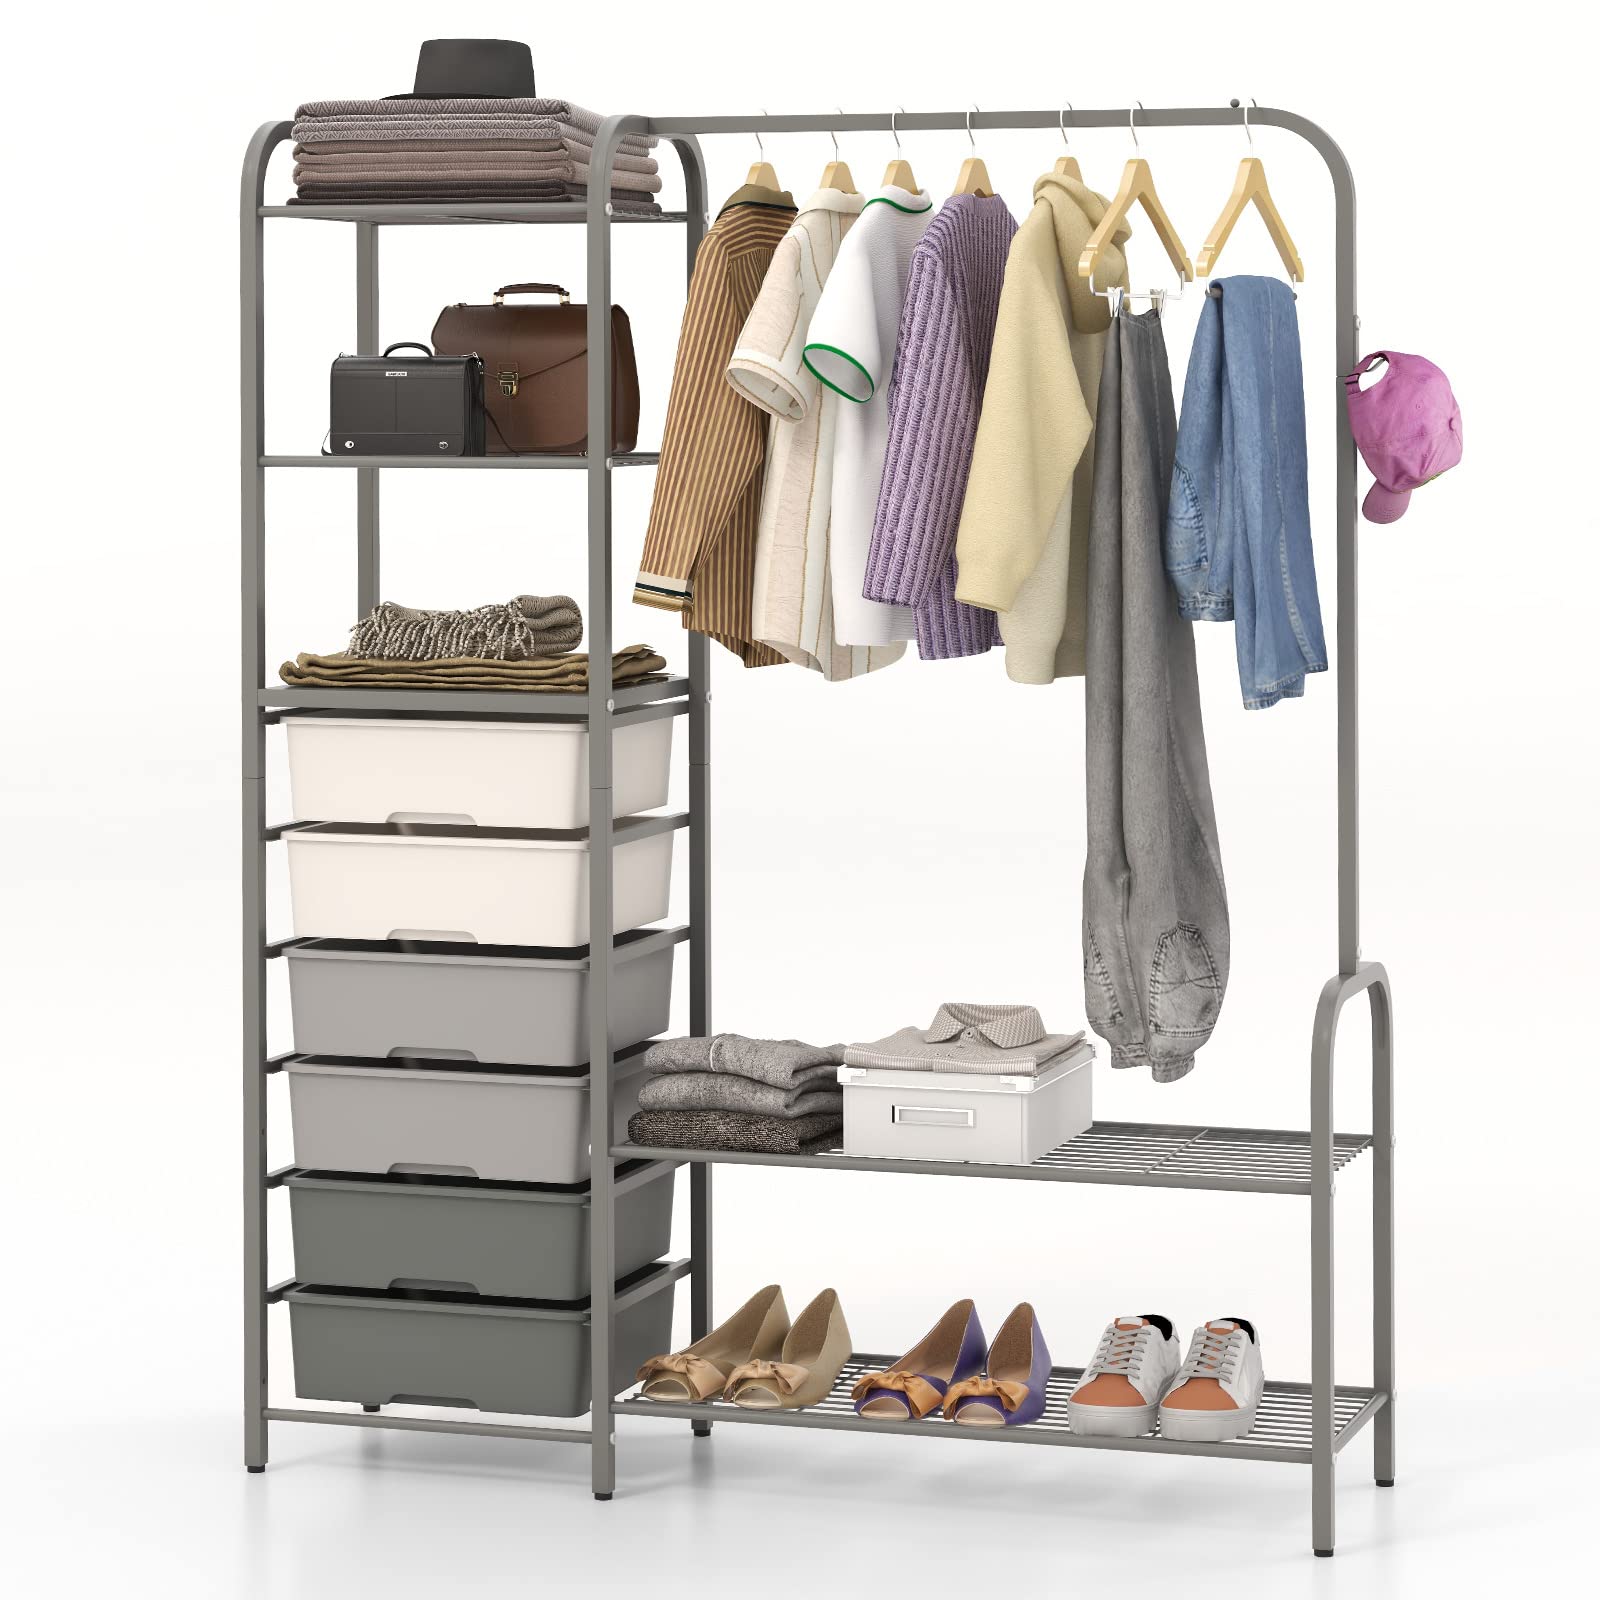 Giantex Free Standing Closet Organizer, Heavy Duty Garment Rack with 6 Removable Drawers (Grey)